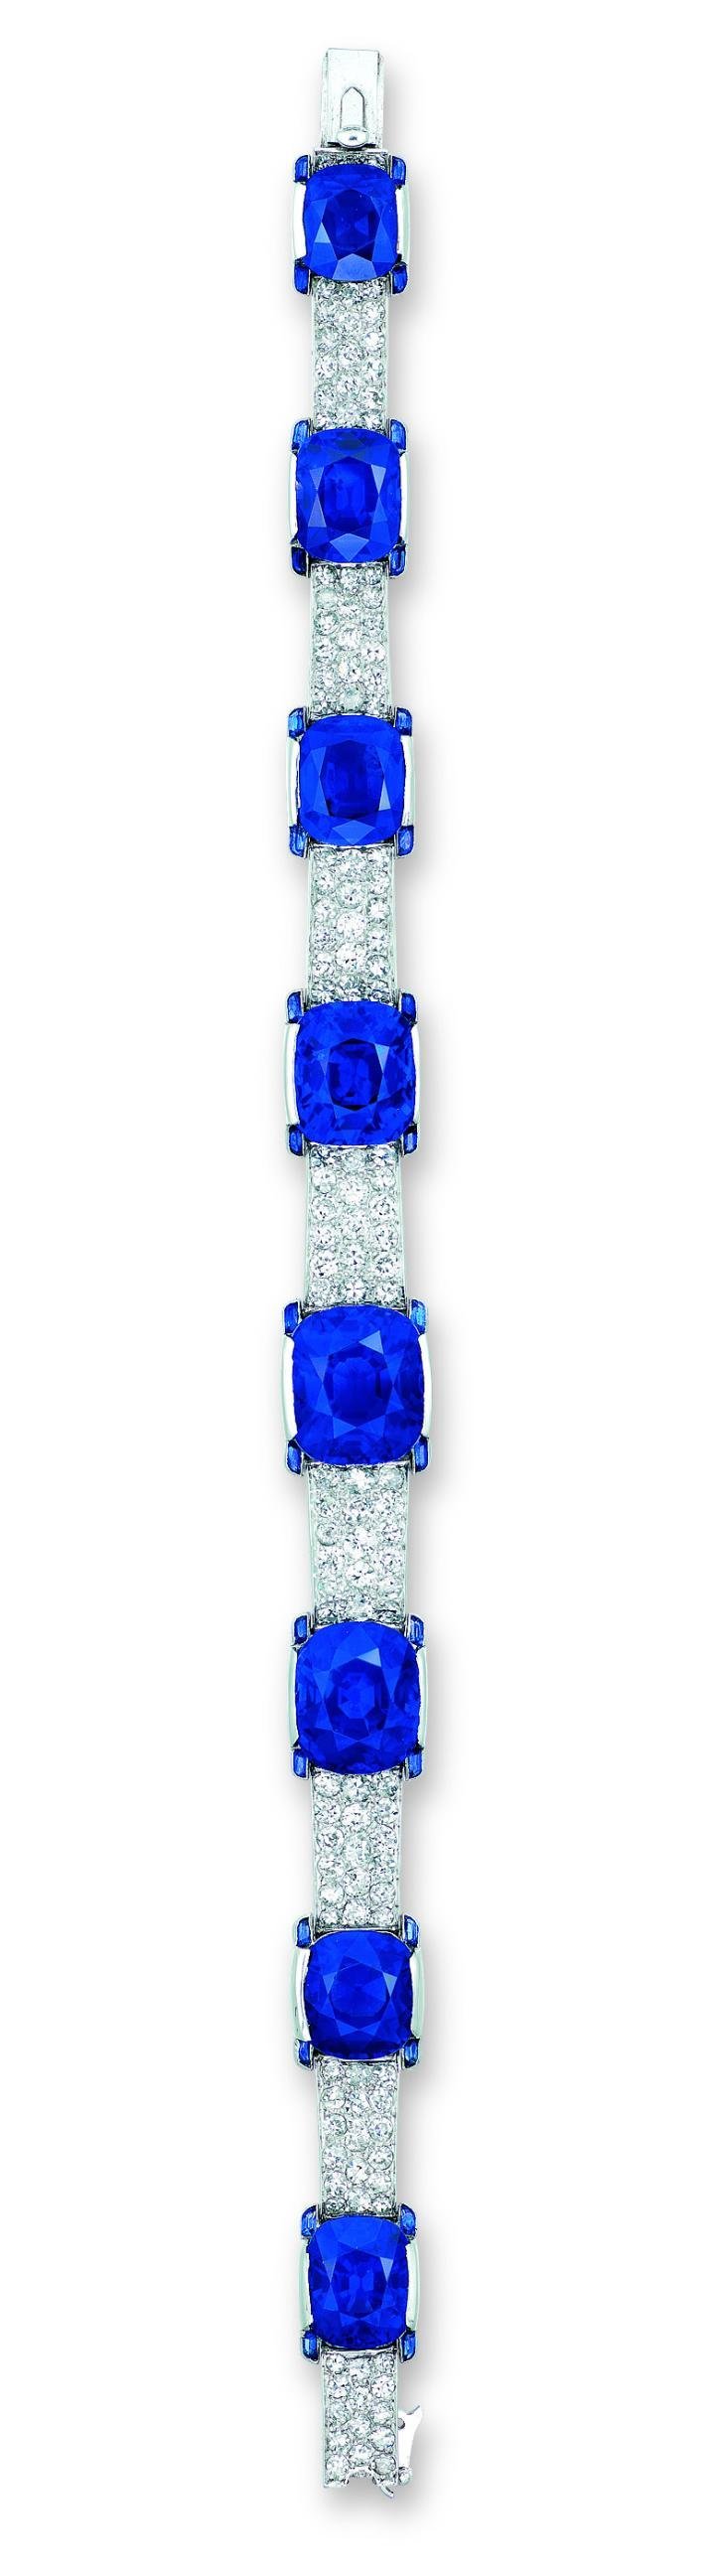  An exceptional Art Deco bracelet by Cartier sold by Christie's Hong Kong in 2016 for HKD 56,120,000 (USD 7,256,316) set with eight graduated cushion-shaped sapphires (10.53 to 3.38 car- ats) and four-stone diamond gallery, 1923, set in platinum.